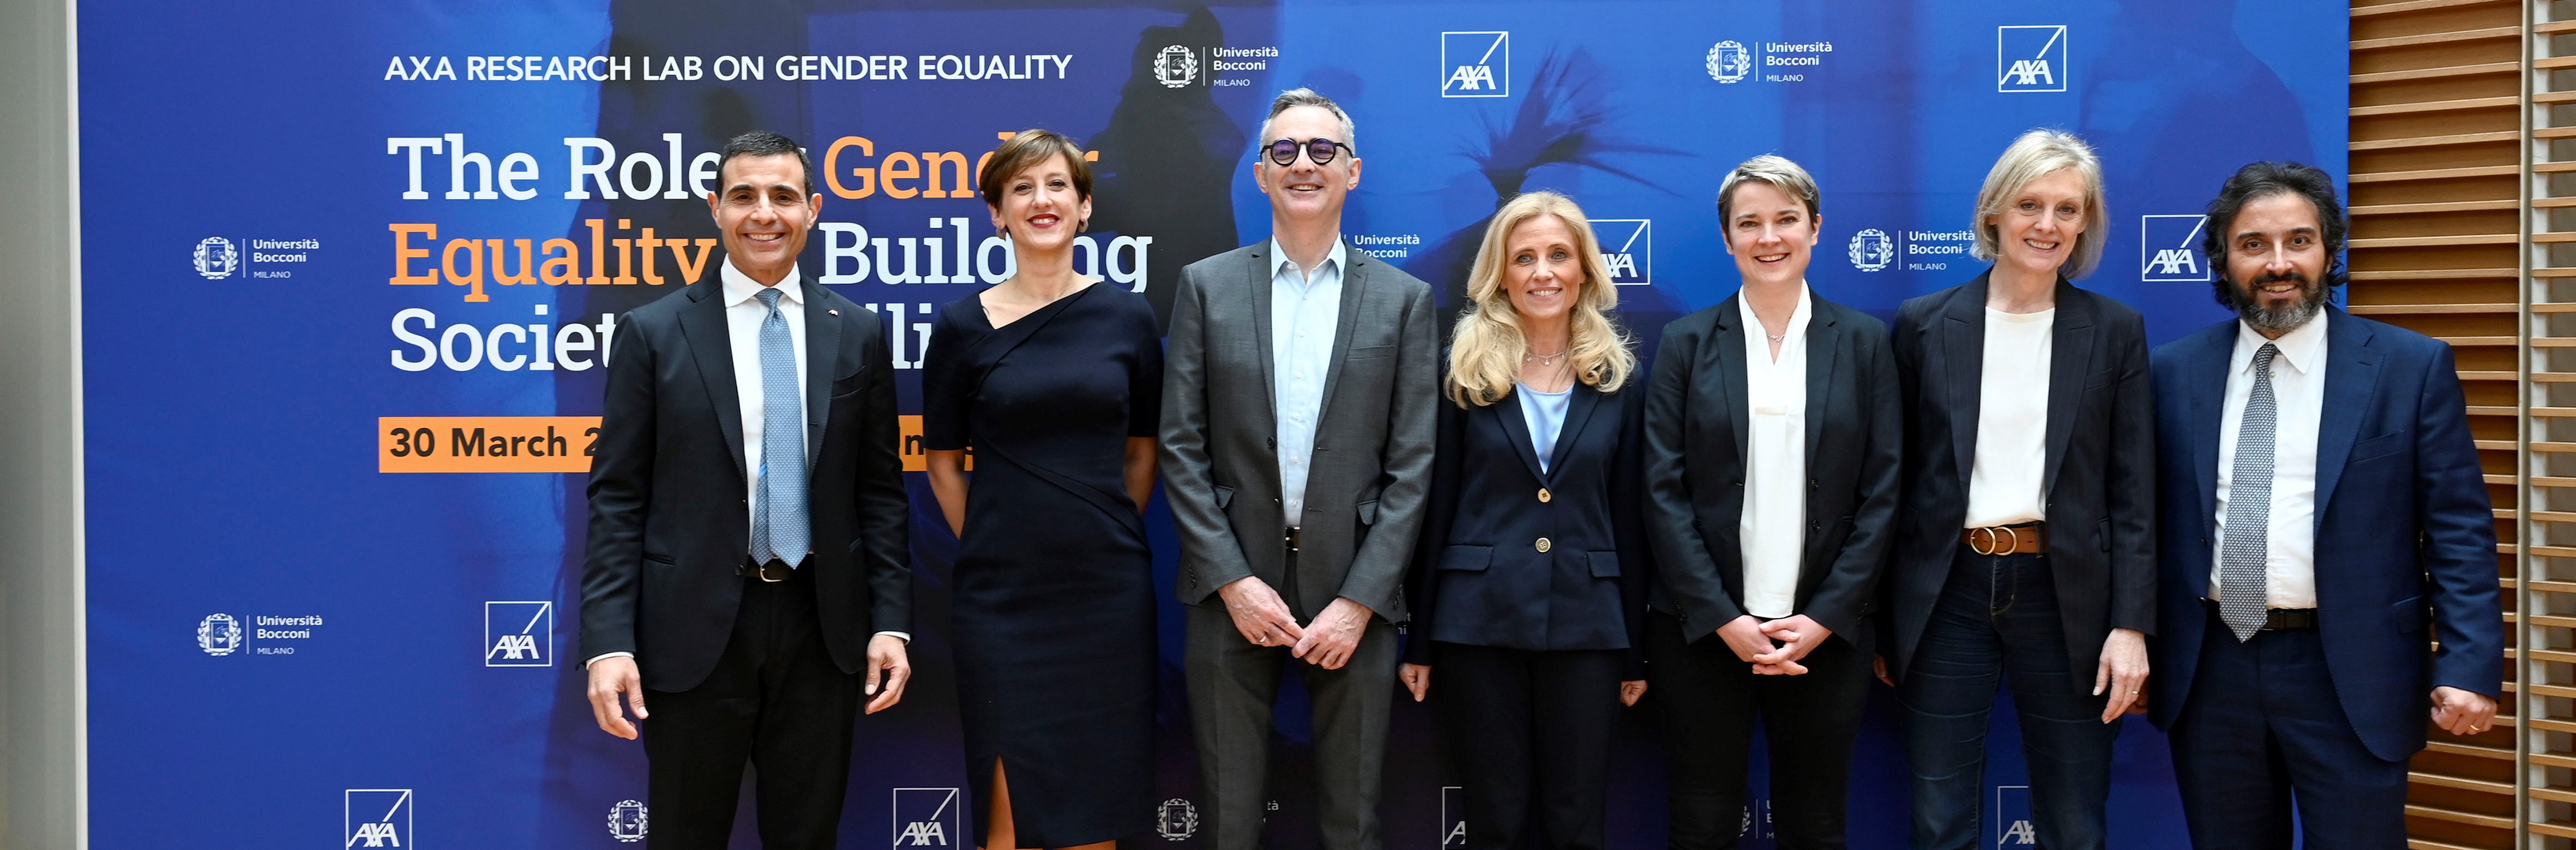 AXA e Bocconi ancora insieme: “The role of Gender Equality in building societal resilience”